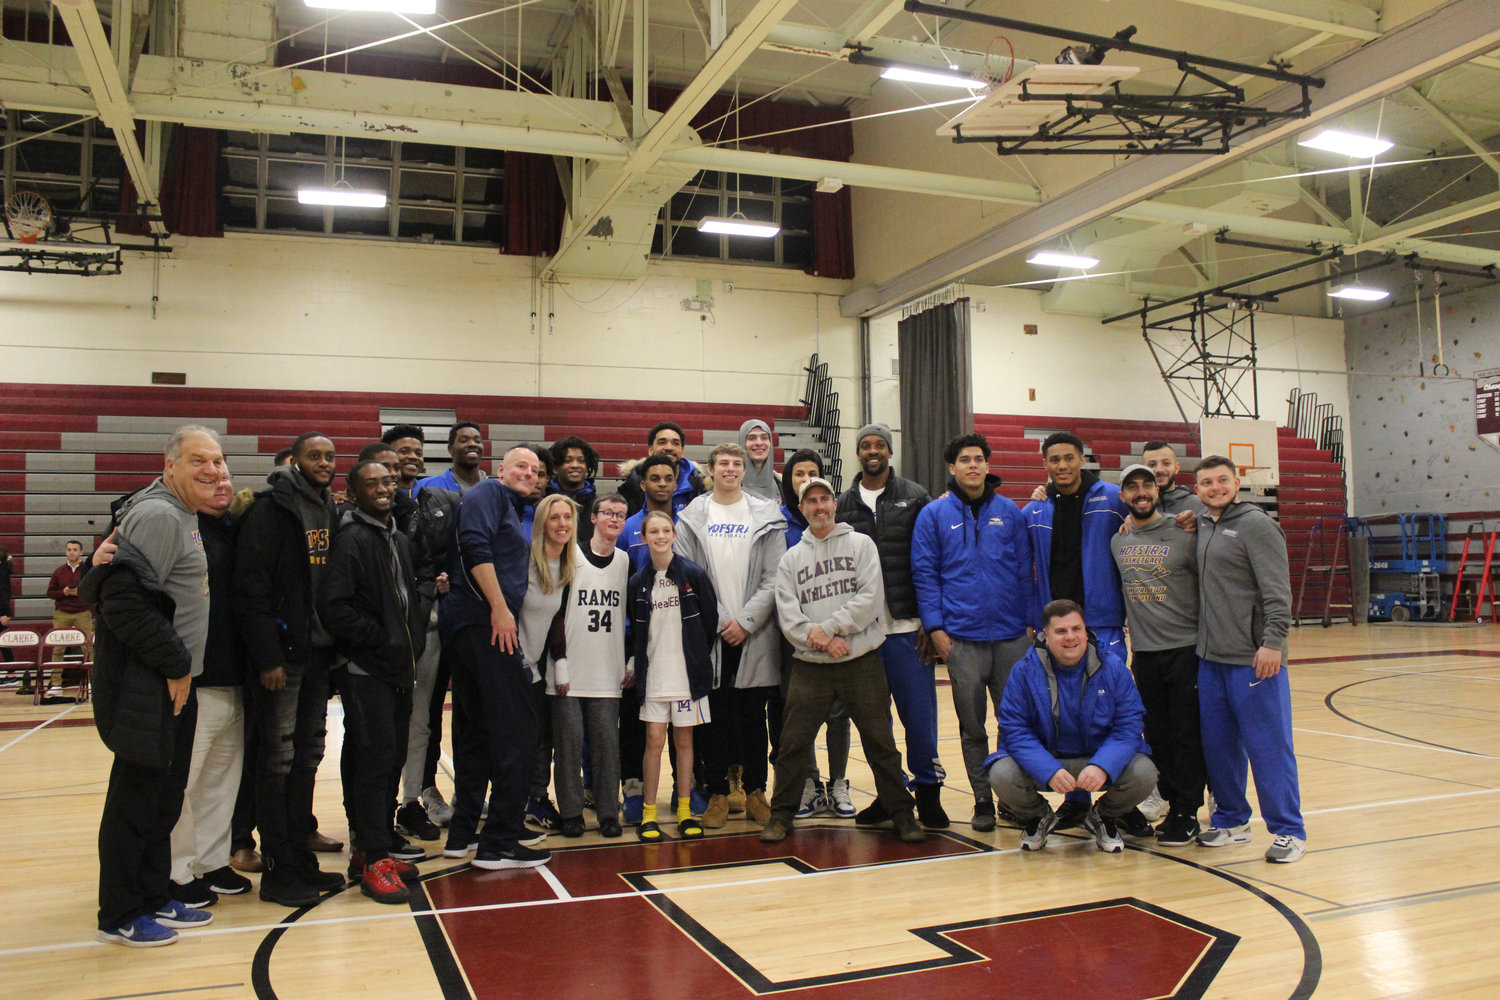 Members of the Hofstra men’s basketball team supported Twible, having adopted him as an honorary member in January 2017.